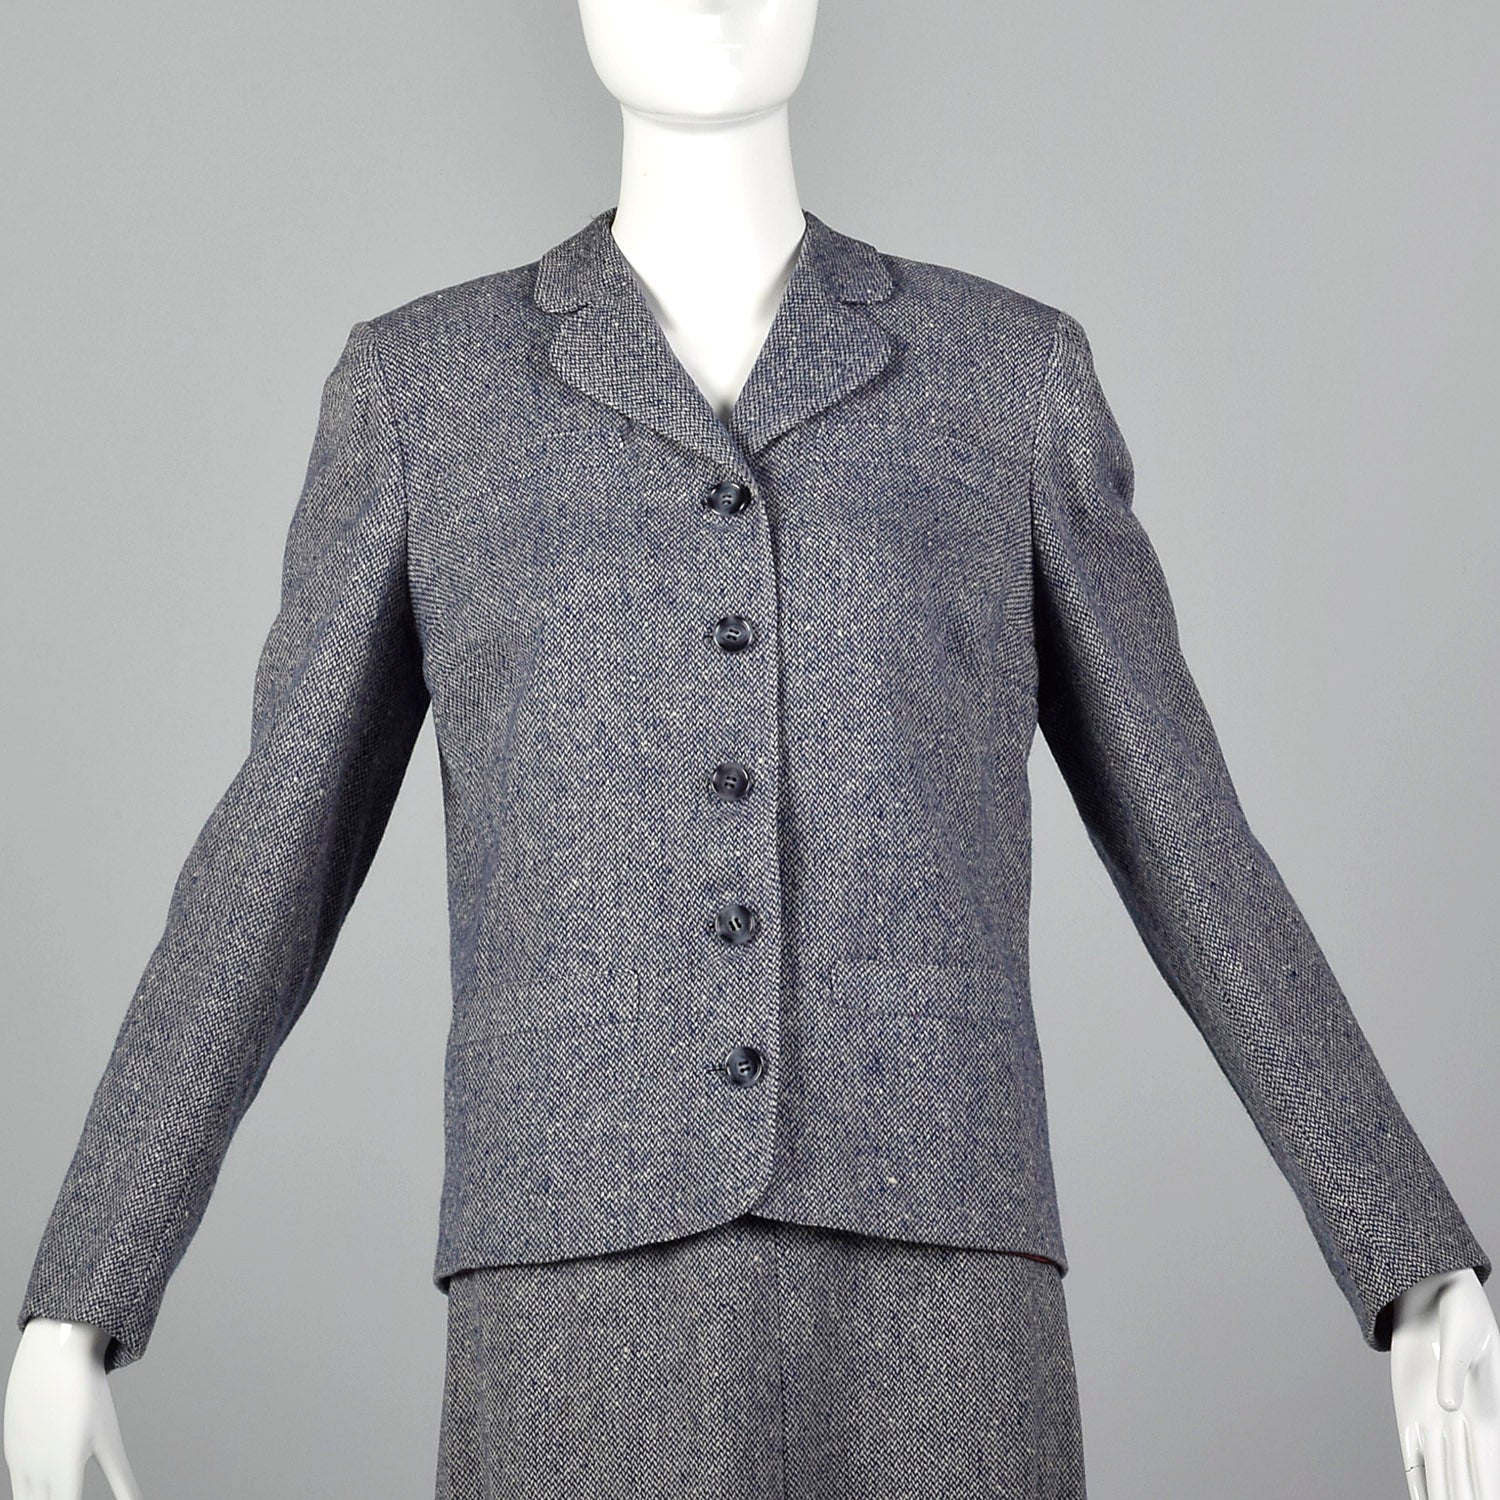 1960s Blue and White Wool Tweed Skirt Suit